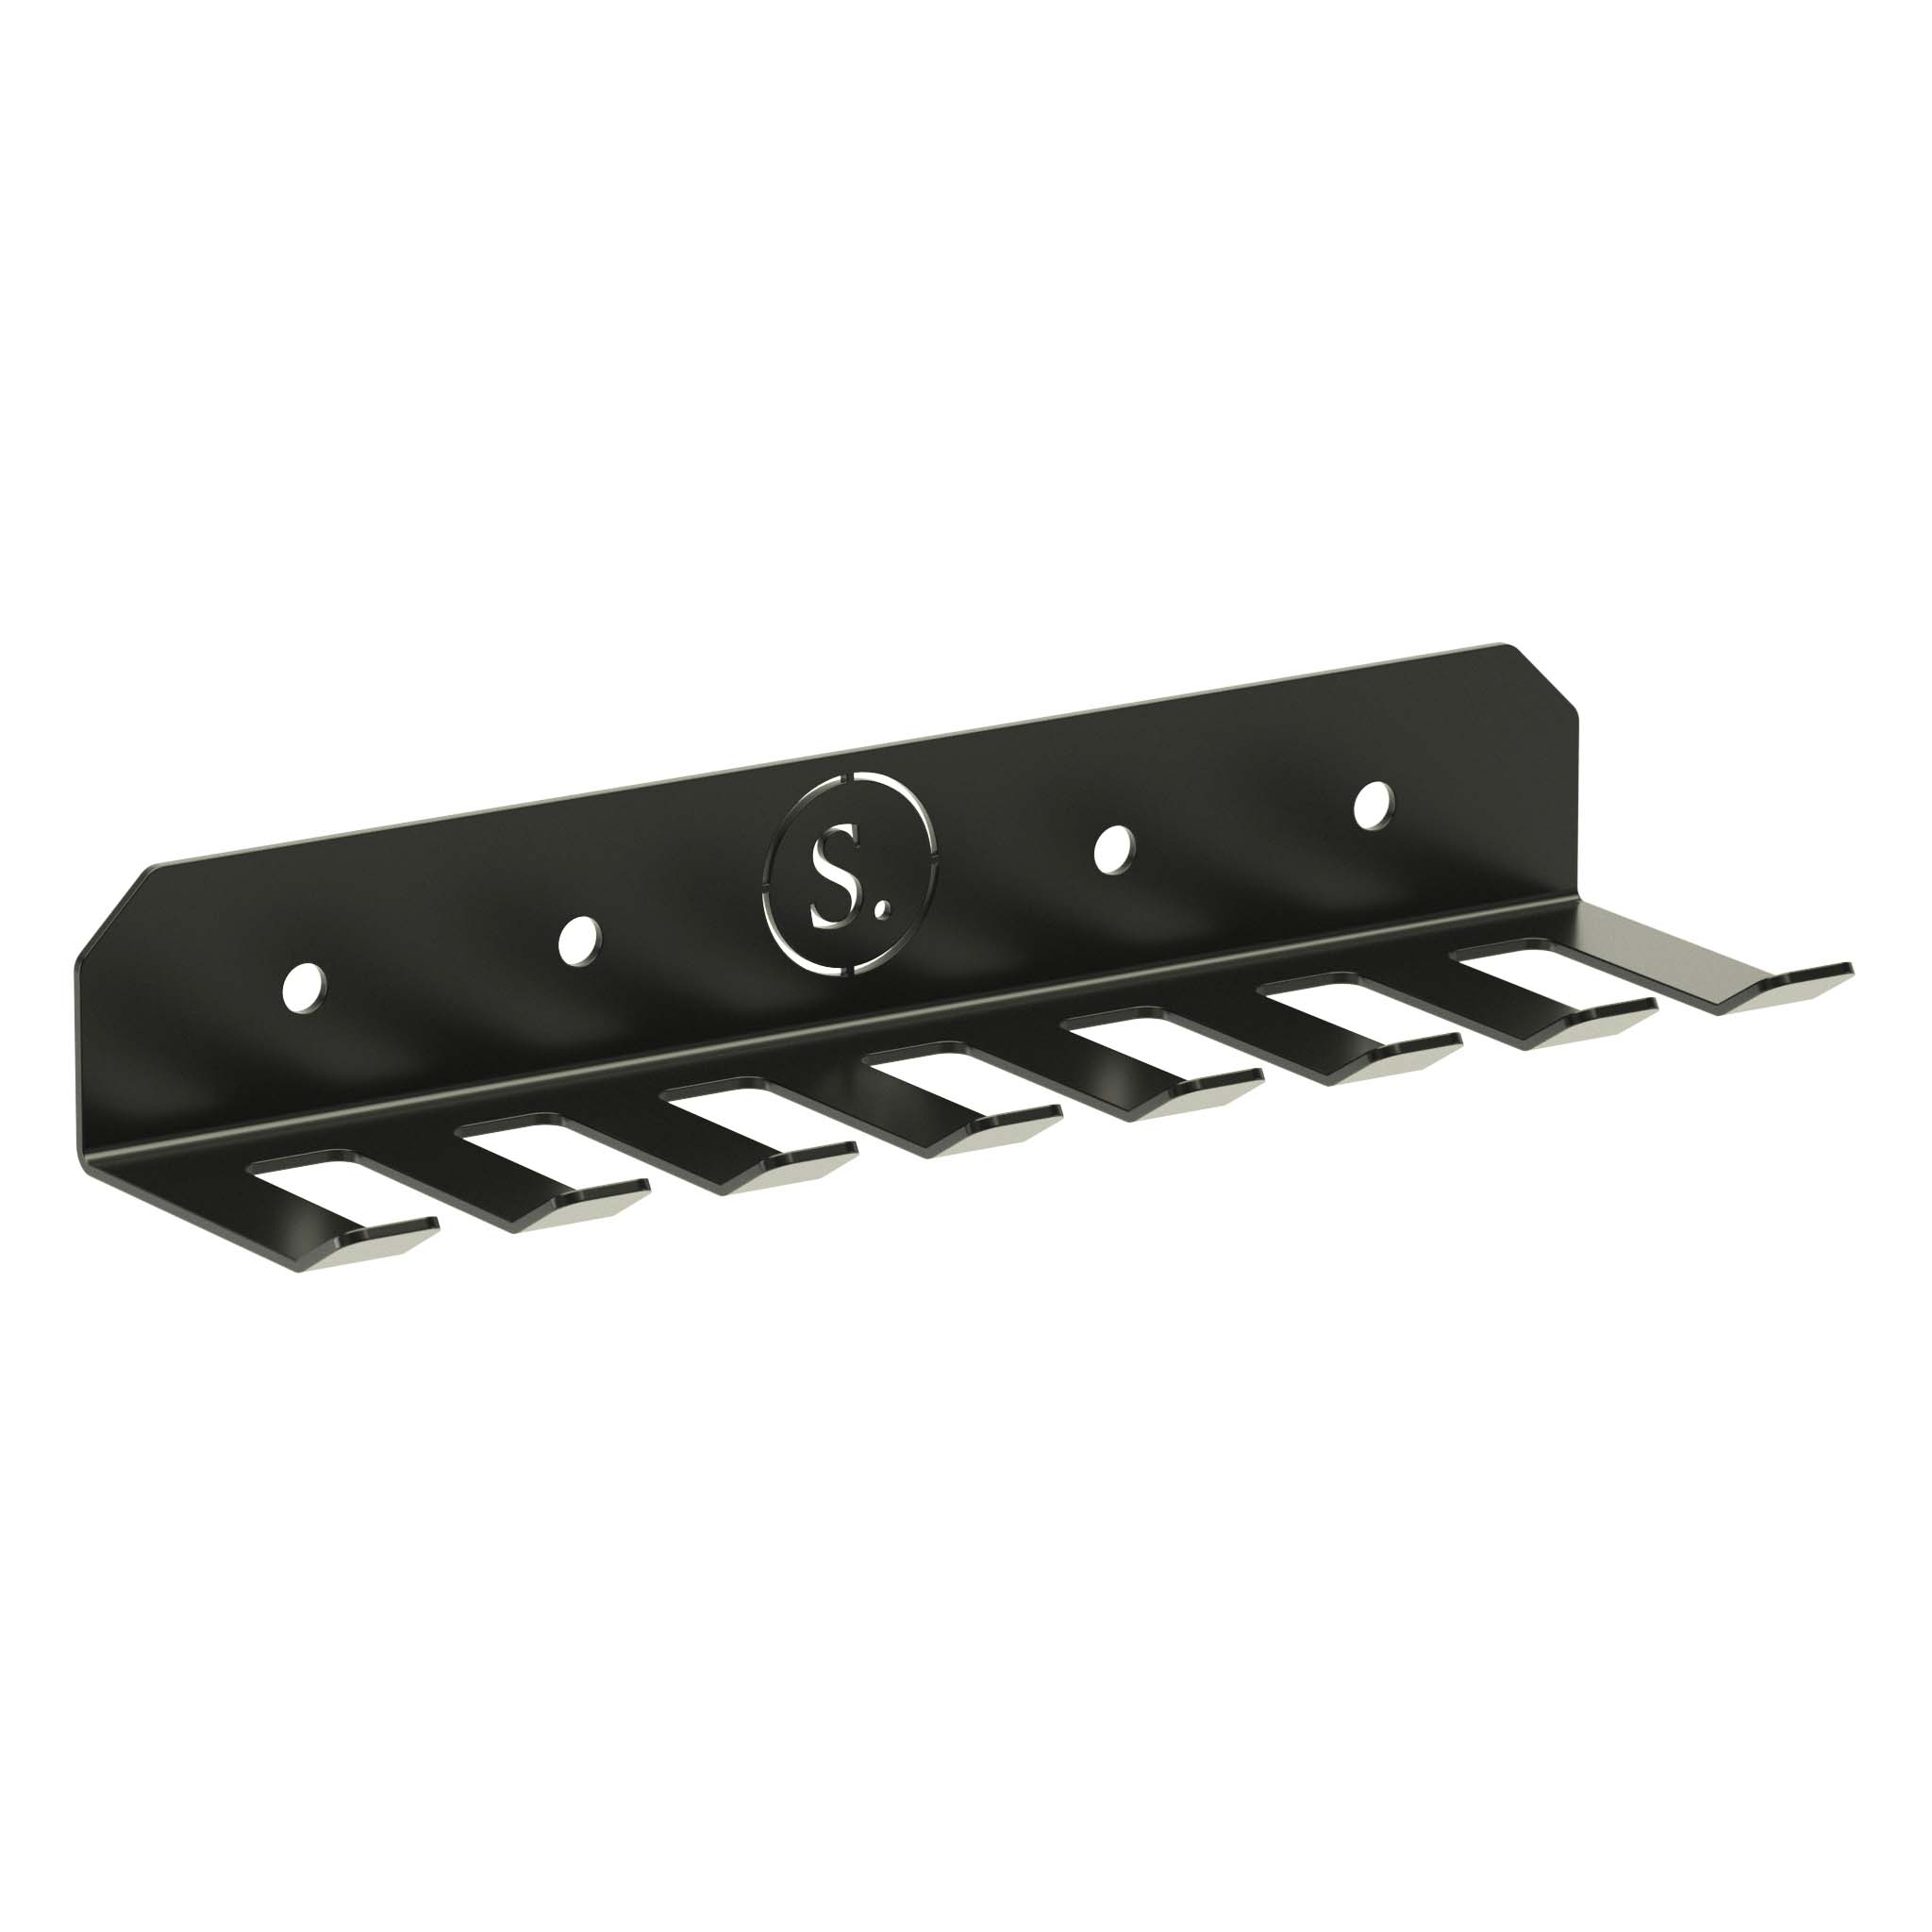 black wall hanger with prongs to hang resistance bands